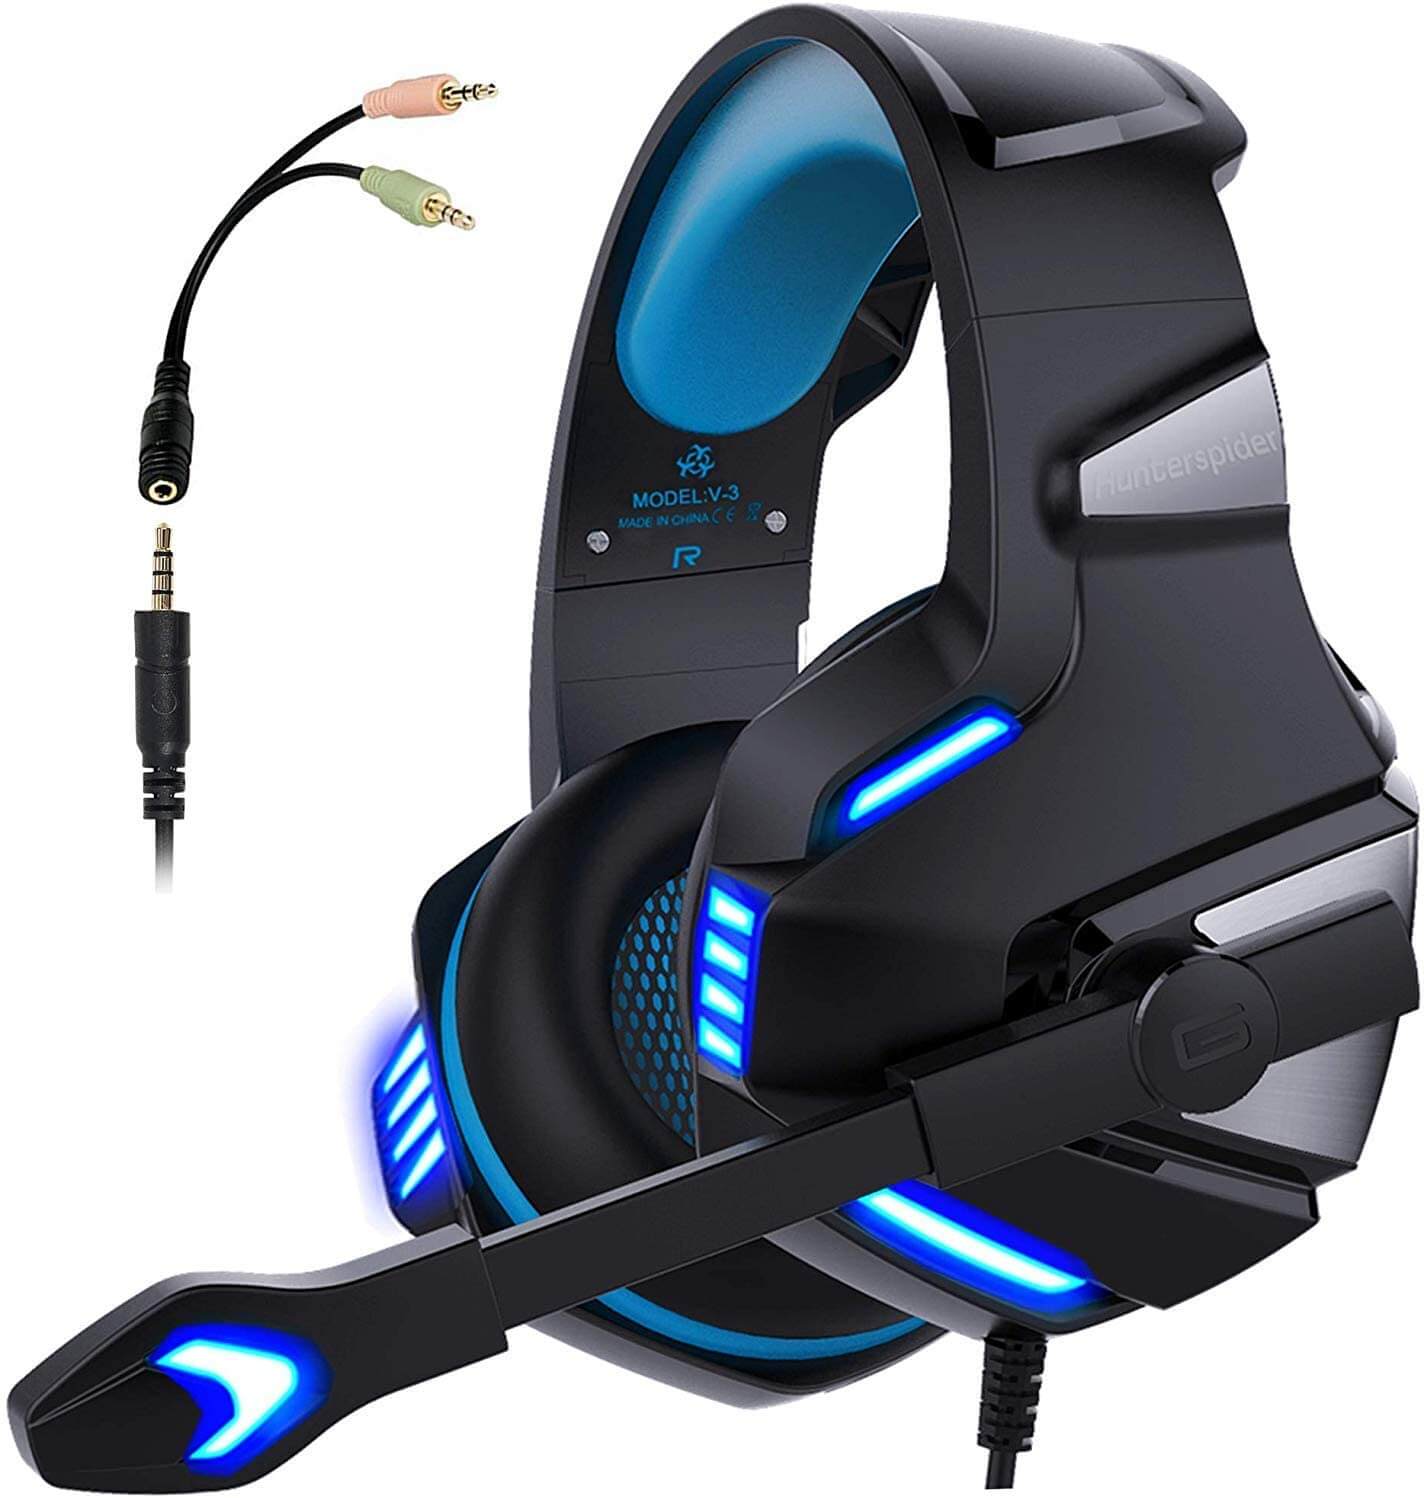 Gaming Headset for PS4 Xbox One PC, Micolindun Over Ear Gaming Headphones with Noise Cancelling Microphone Volume Control RGB LED Light, for PC Laptop Mac